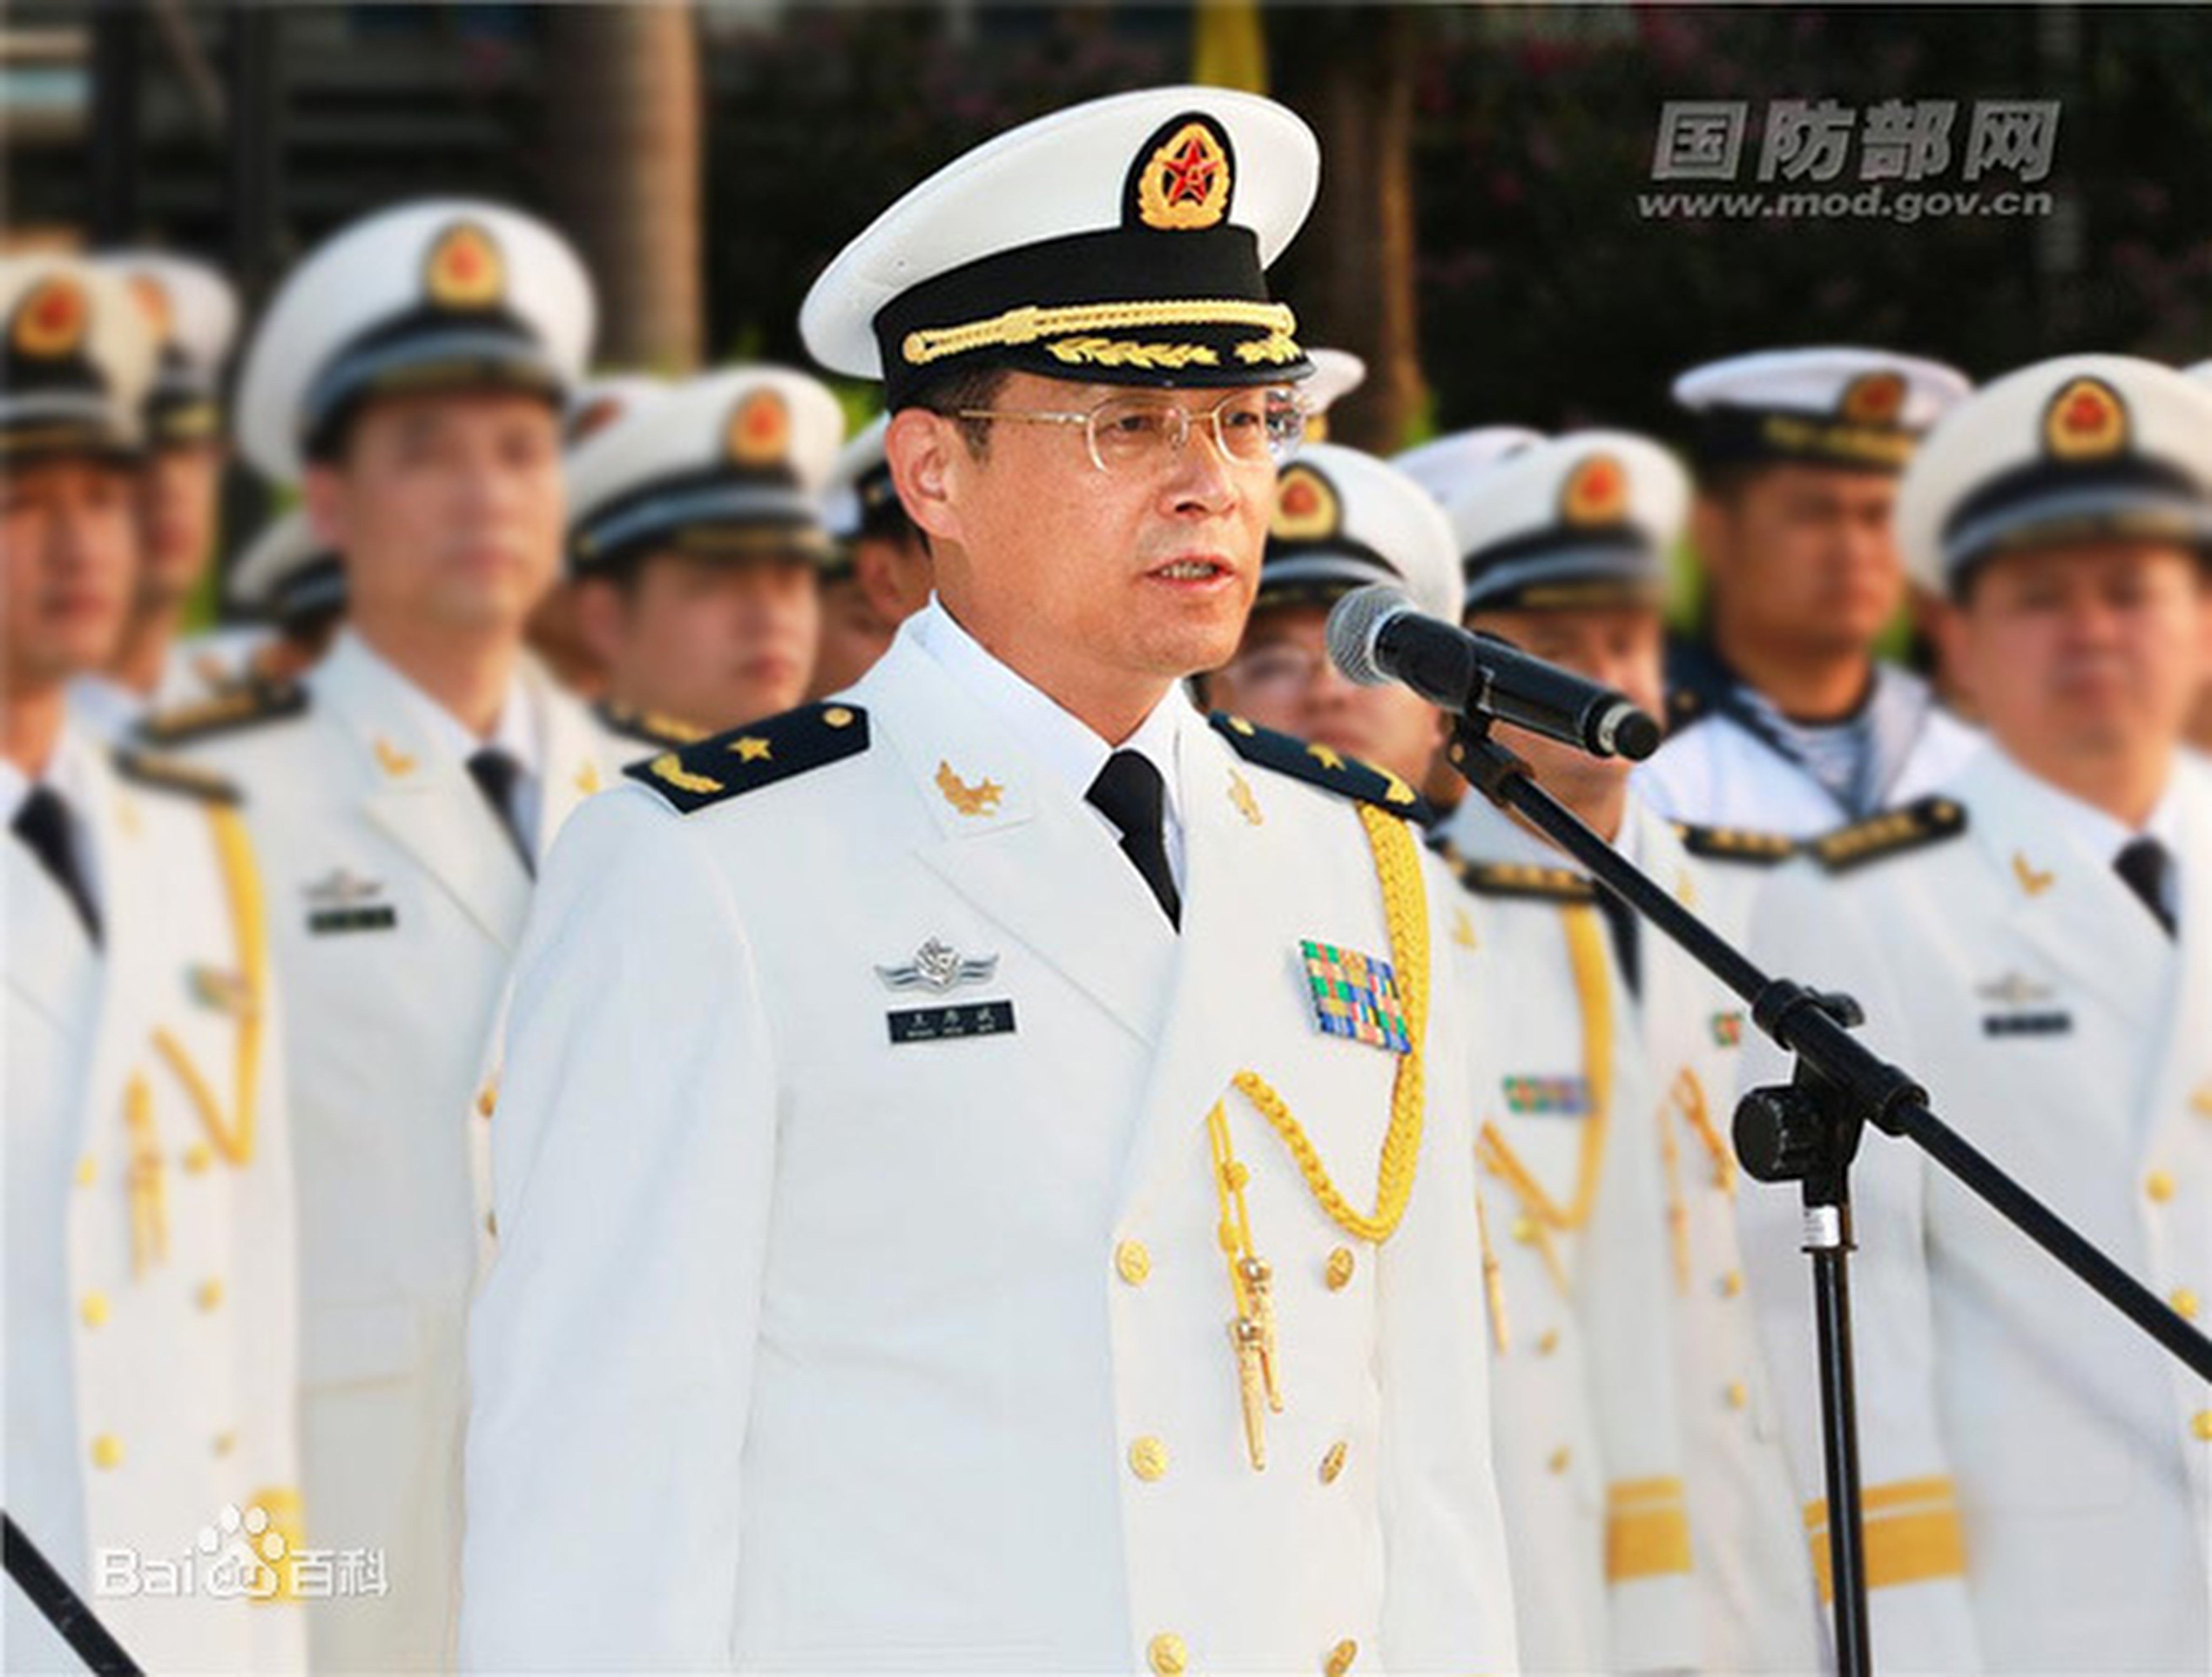 Wang Houbin moves over from the navy to lead the force. Photo: Weibo